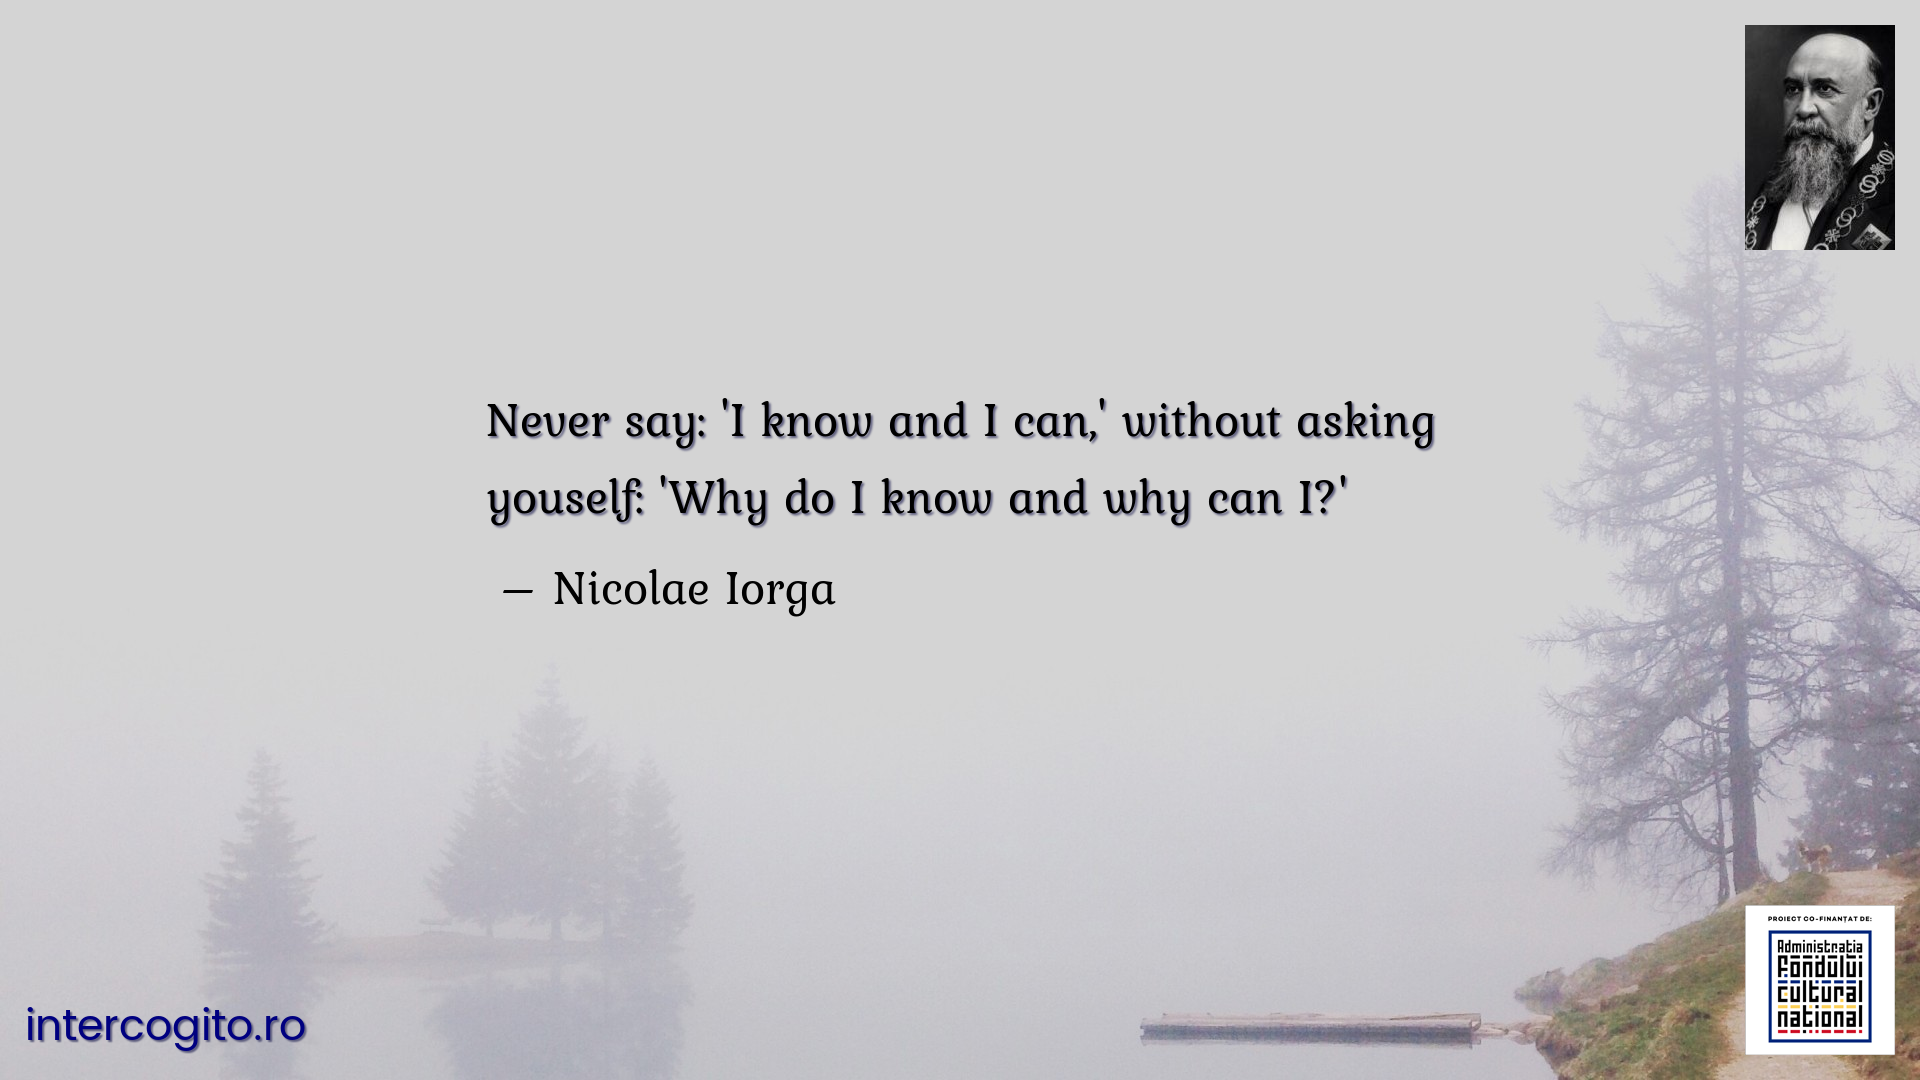 Never say: 'I know and I can,' without asking youself: 'Why do I know and why can I?'